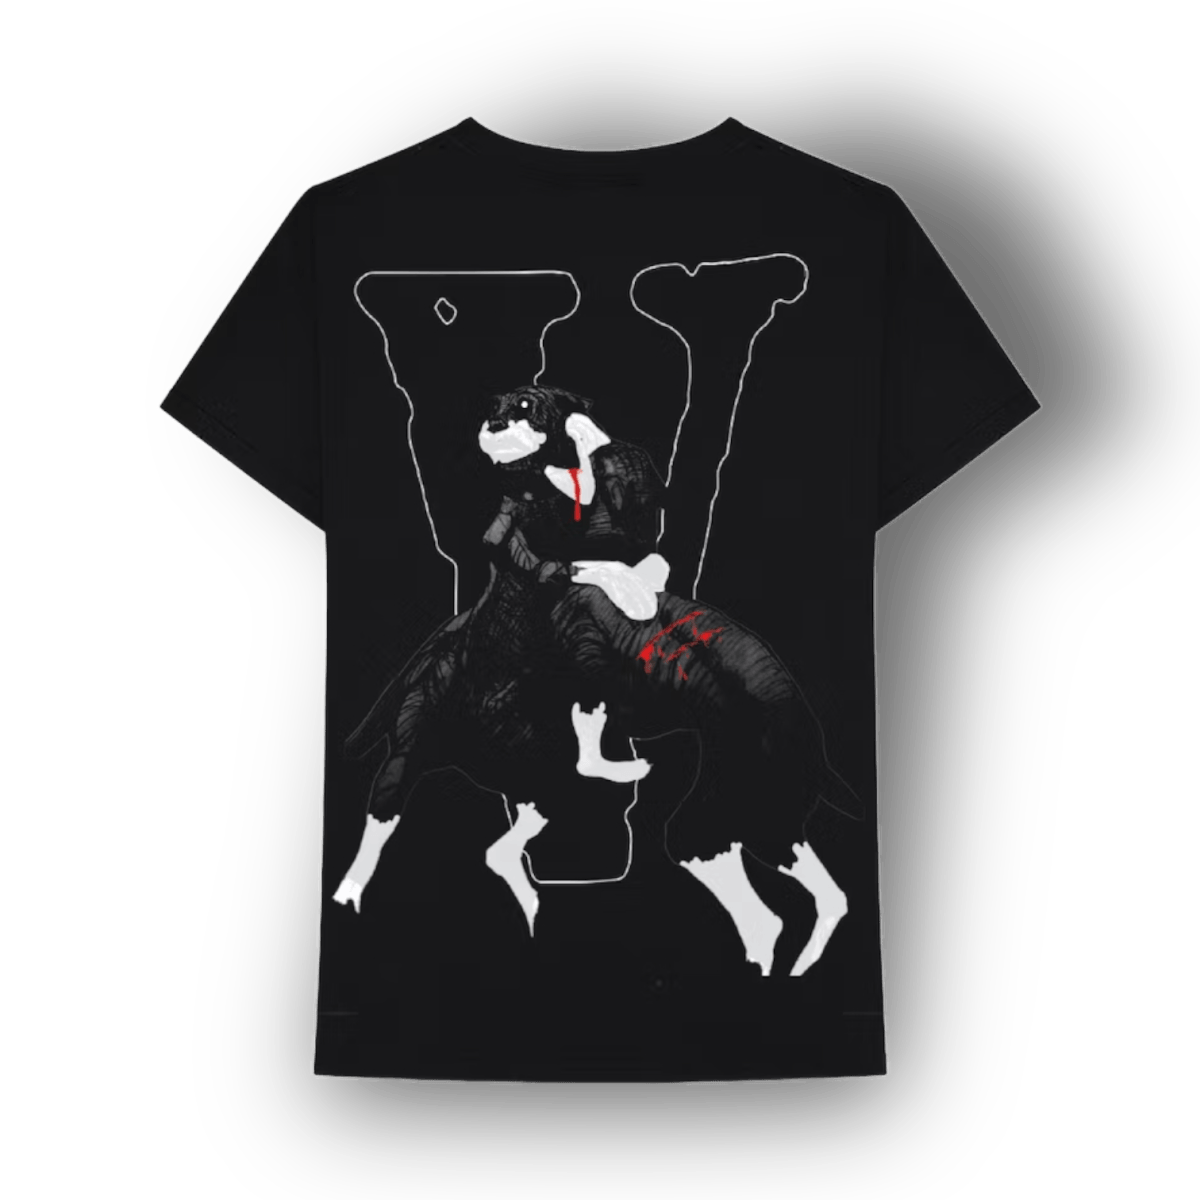 Vlone x City Morgue Dogs Tee Black - Jawns on Fire